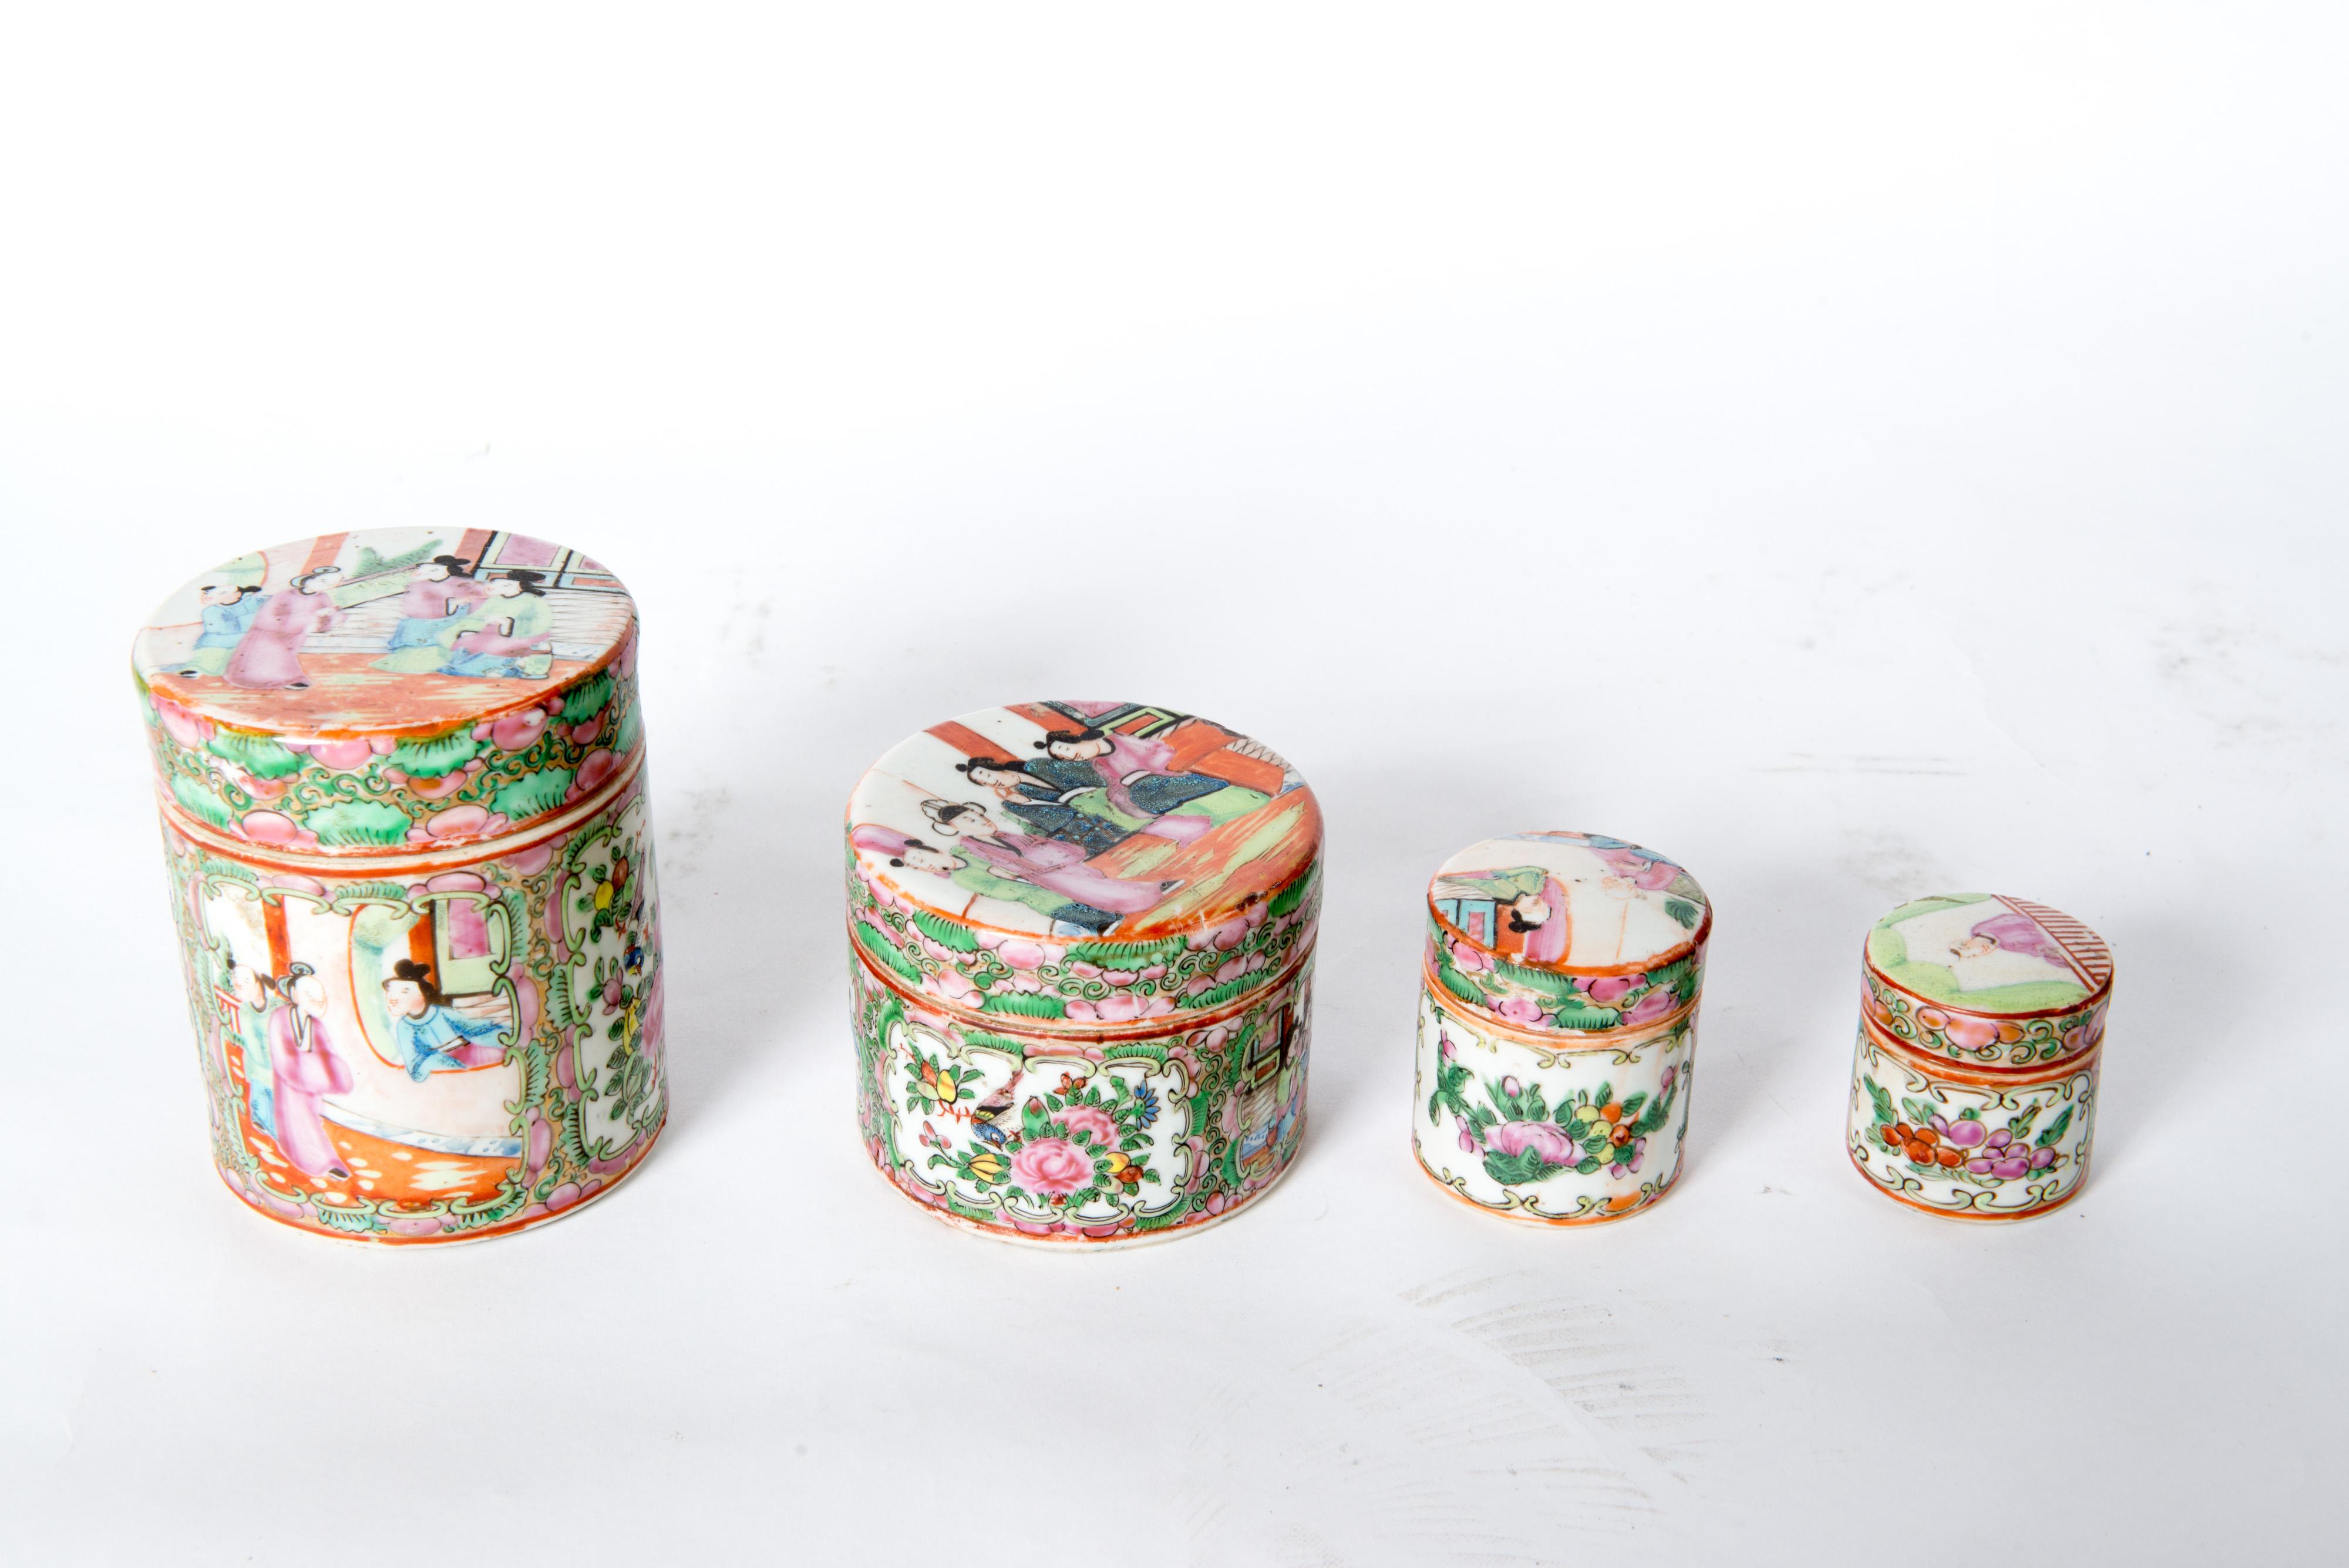 Set of four Japanese lidded porcelain jars. Second jar is 3.75 diameter, 3 high. Third jar is 2.25 diameter, 2.5 high. Fourth jar is 2 diameter, 2 high. 
The lid to the second largest jar is damaged. There is a piece missing on the rim.